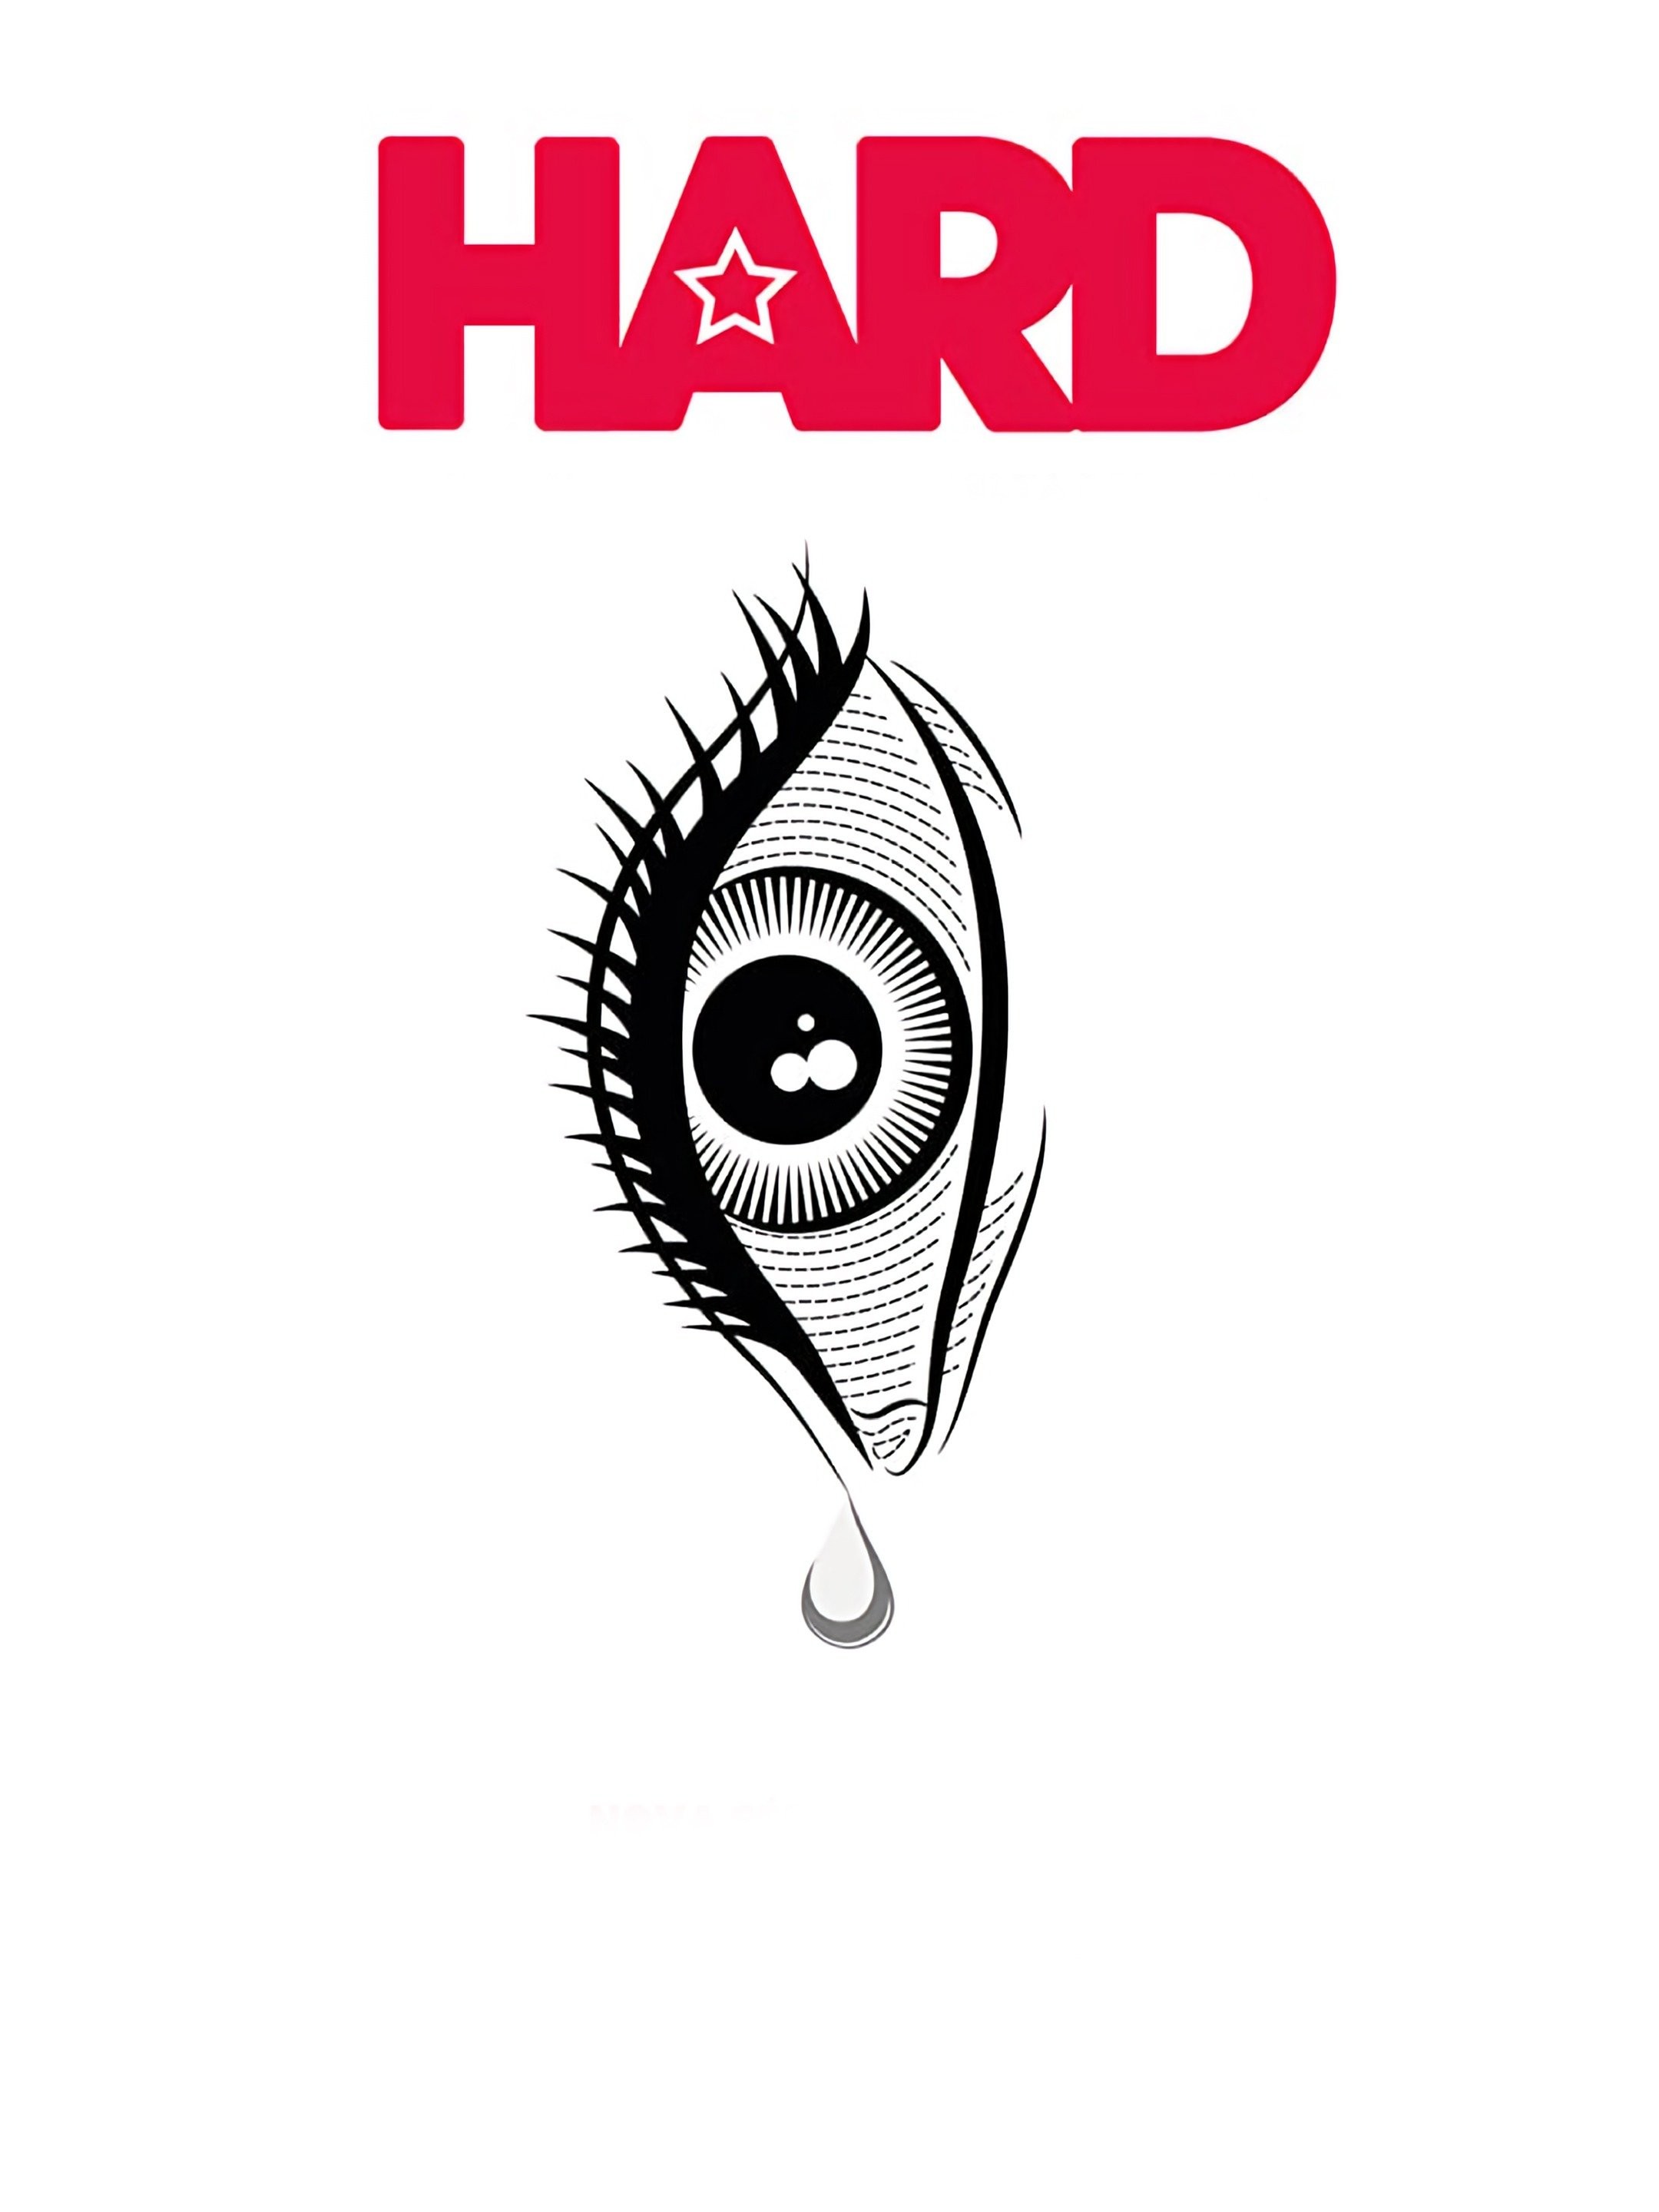 Hard' HBO Review: Stream It or Skip It?